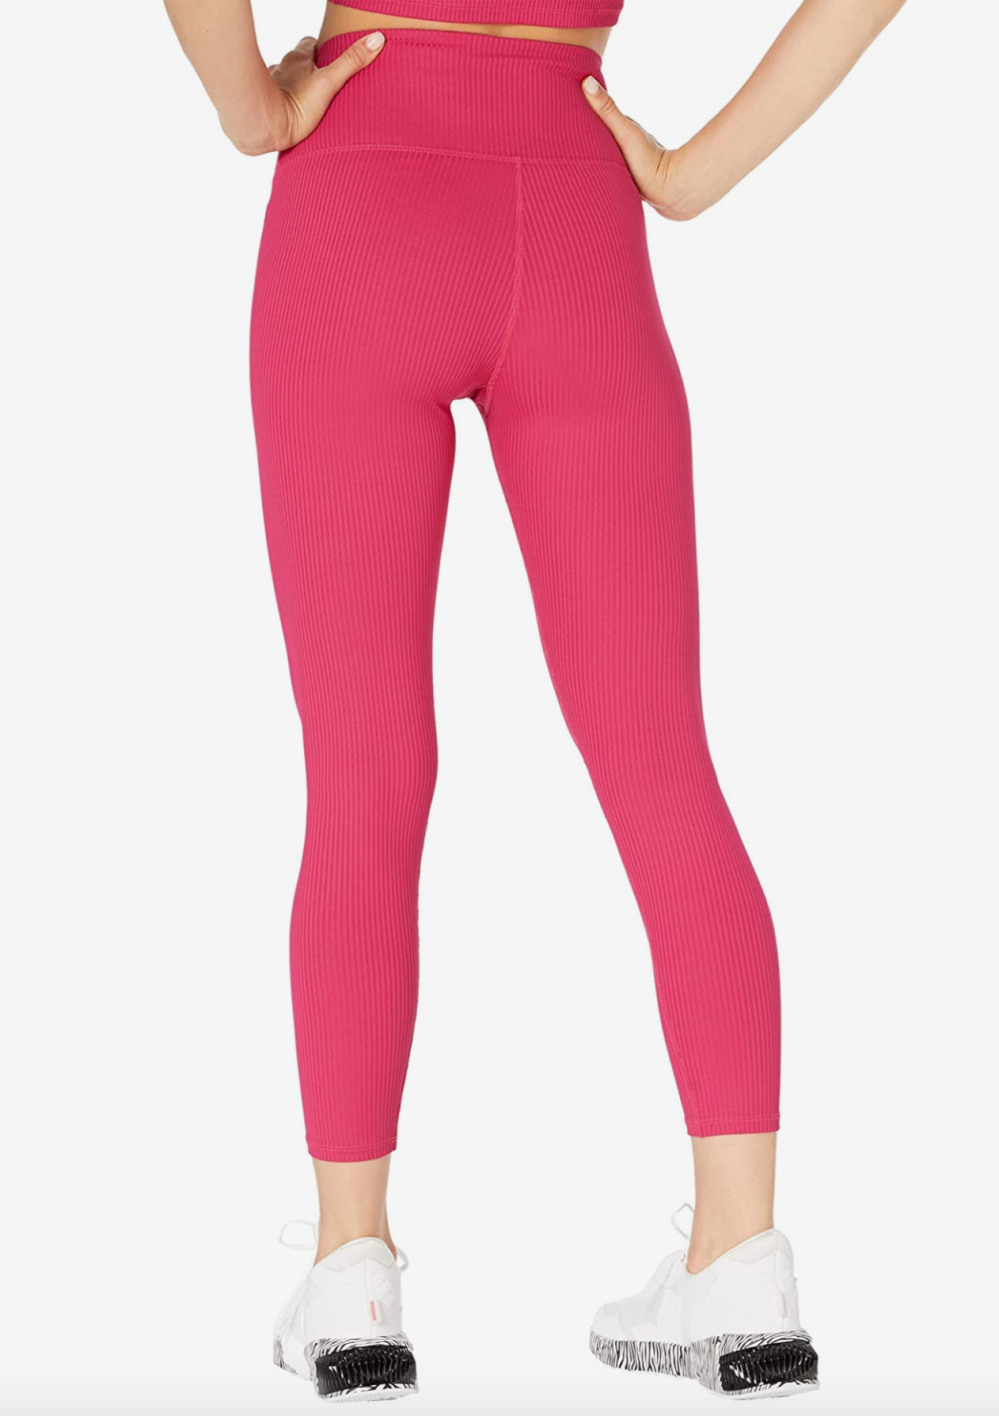 https://www.usmagazine.com/wp-content/uploads/2021/08/Carbon38-Ribbed-78-Leggings-2.png?w=1000&quality=86&strip=all